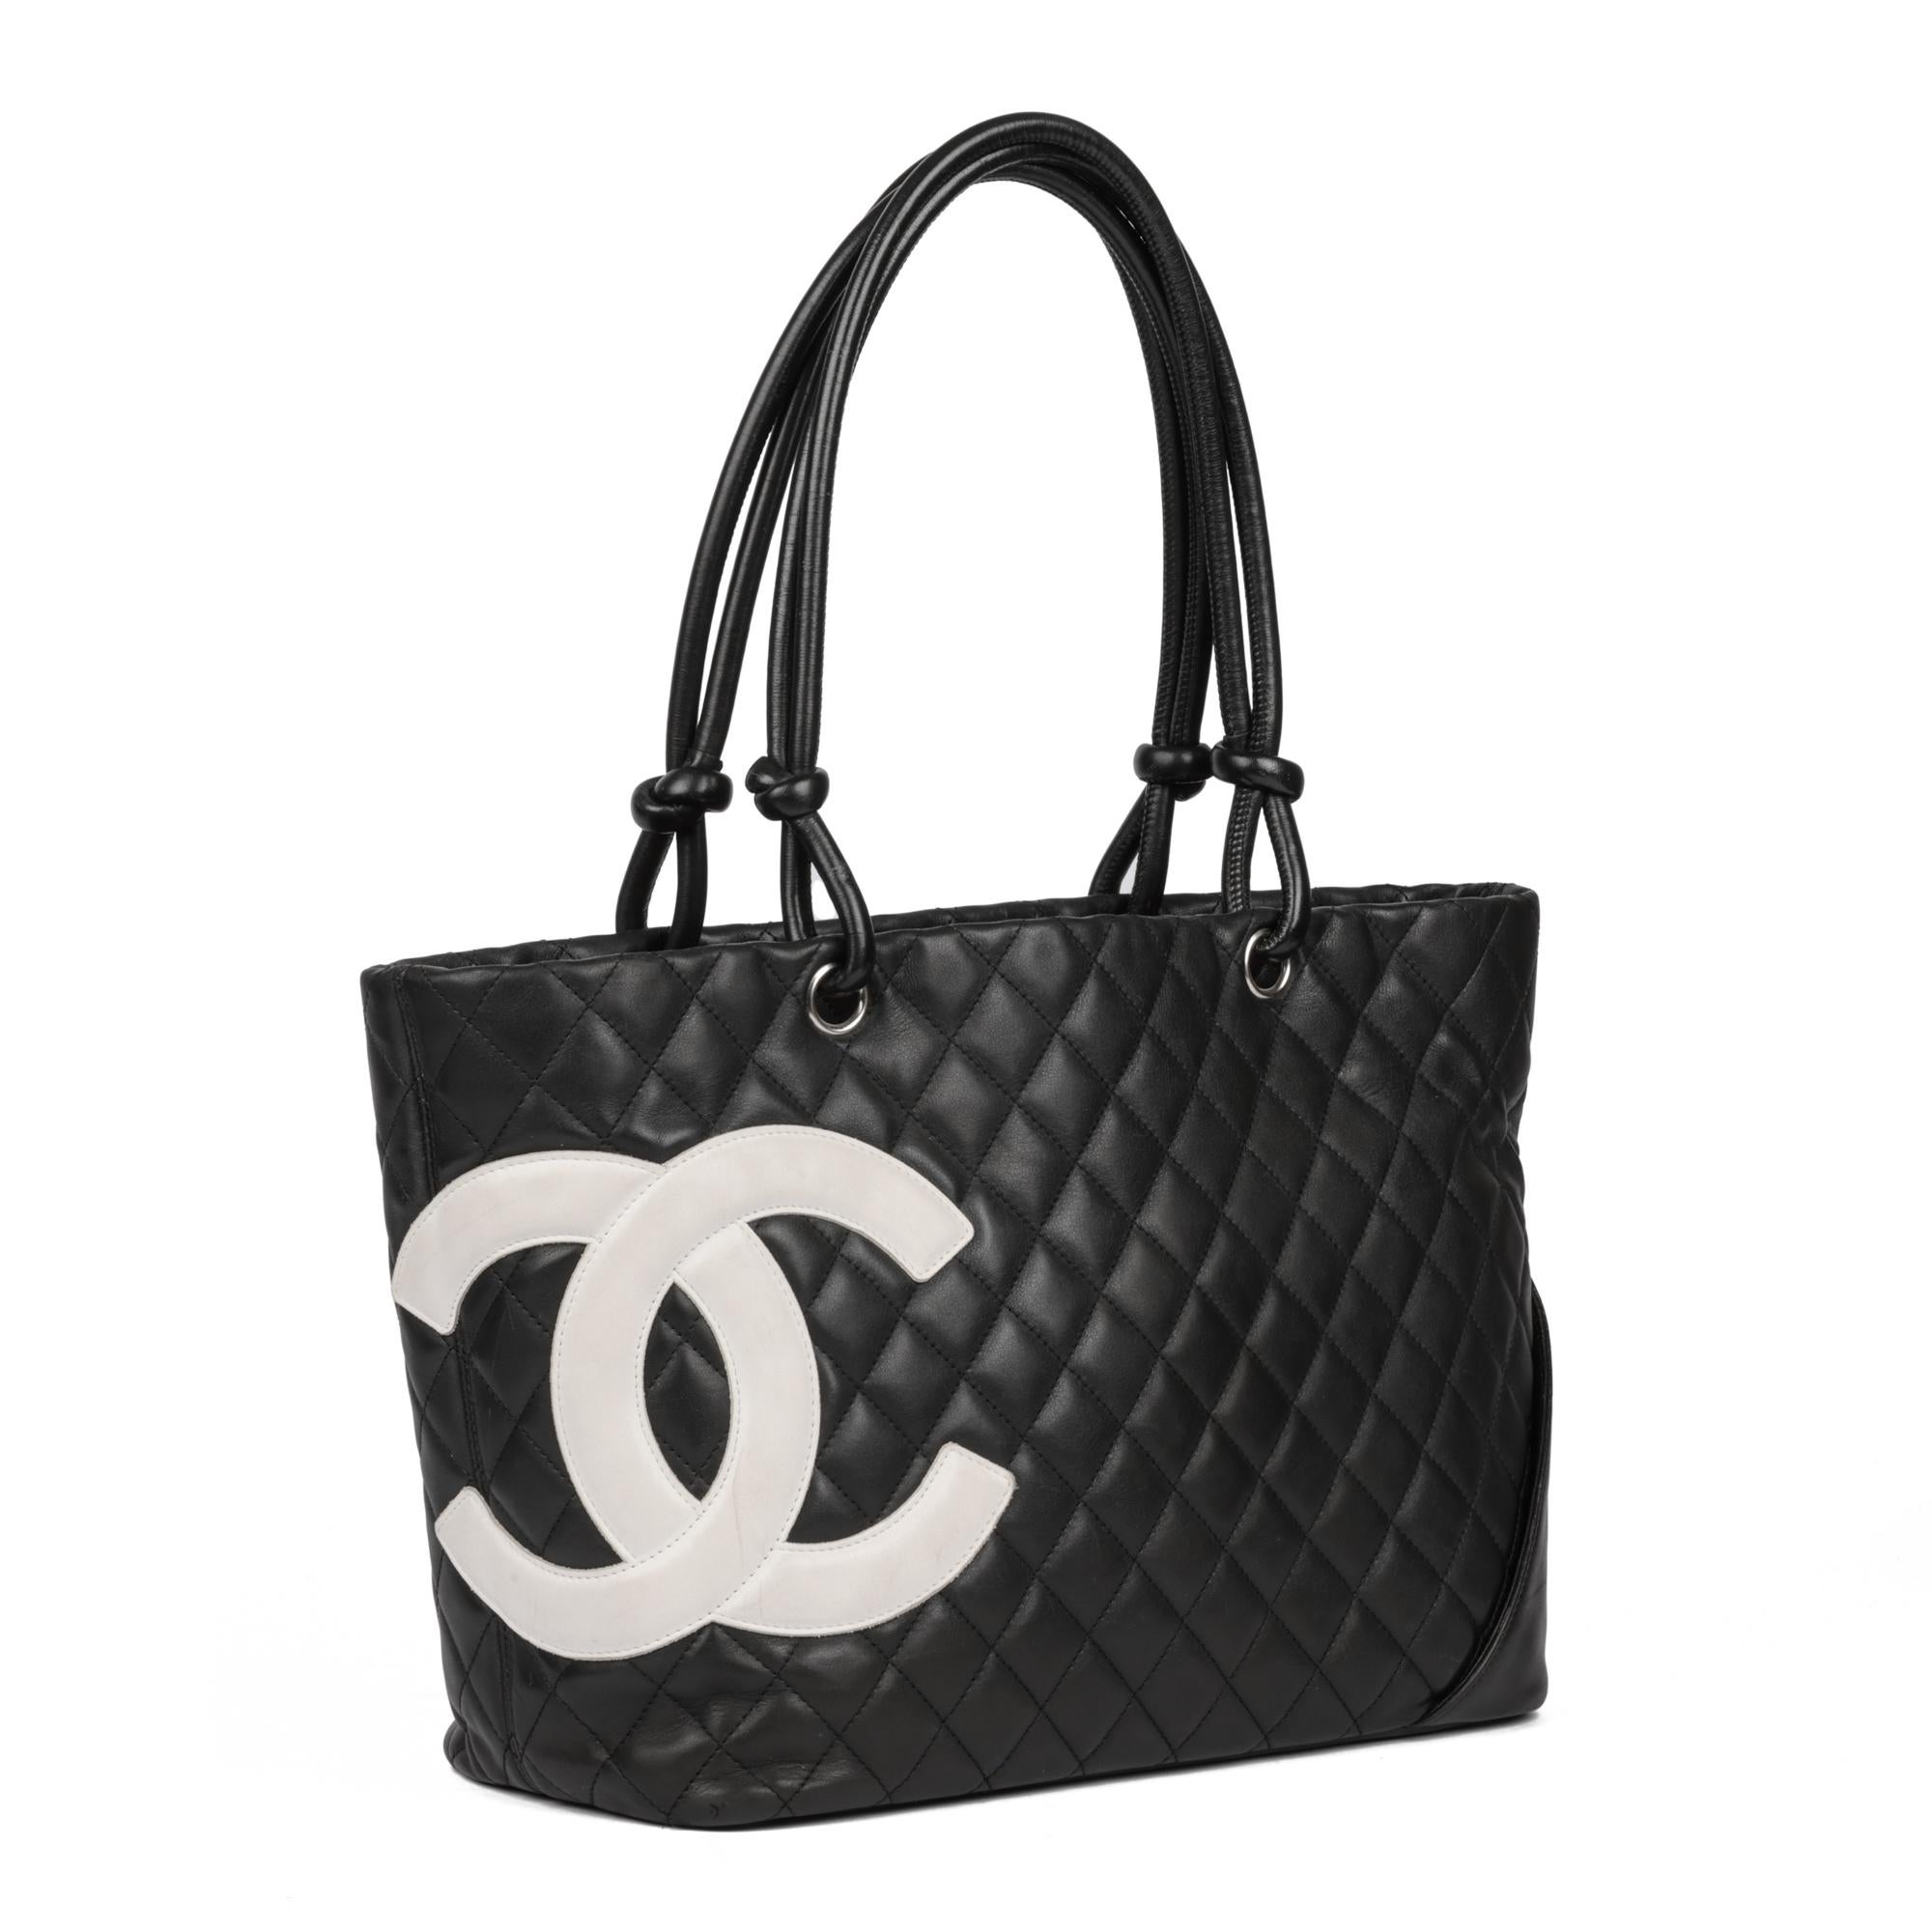 CHANEL
Black Quilted Lambskin Small Cambon Tote Bag 

Xupes Reference: CB858
Serial Number: 10321918
Age (Circa): 2008
Accompanied By: Chanel Dust Bag 
Authenticity Details: Serial Sticker (Made in Italy)
Gender: Ladies
Type: Tote, Shoulder

Colour: